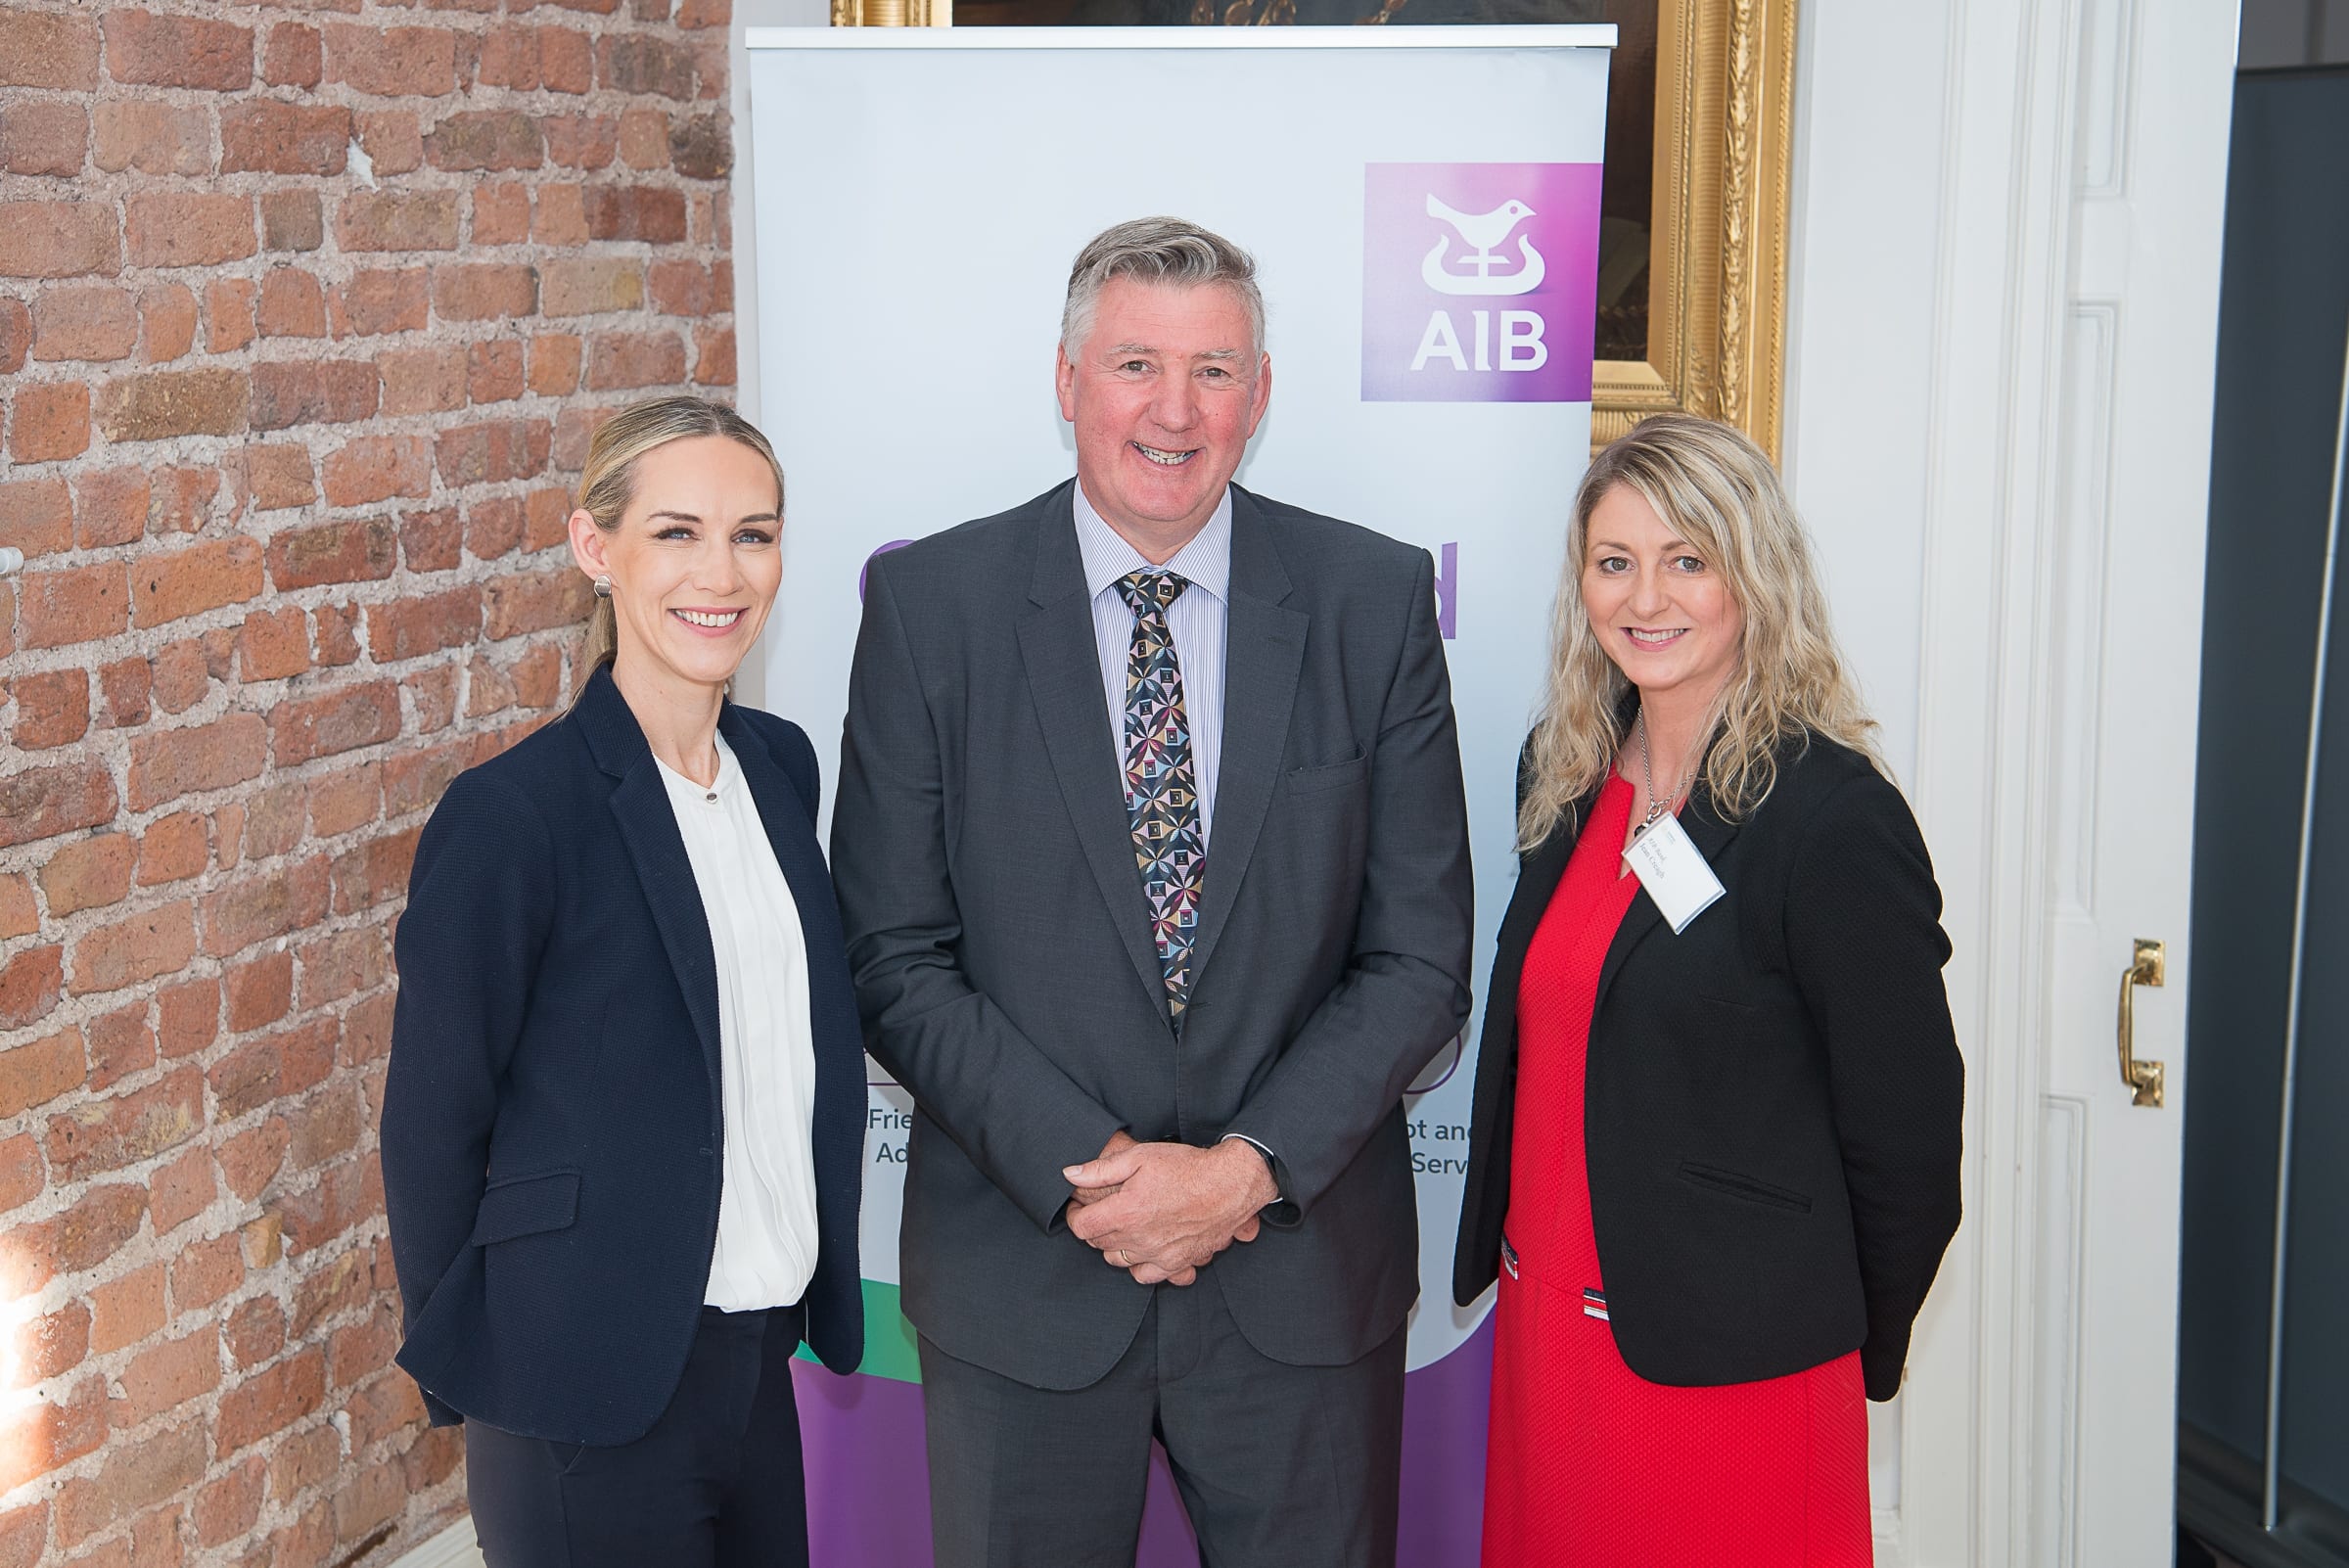 From Left to Right:  New Members Breakfast which took place on the 7th June in the Limerick Chamber Boardroom:  Dee Ryan - CEO Limerick Chamber, Dermot Graham - AIB, Jean Creagh.  - AIB.
Photo by Morning Star Photography